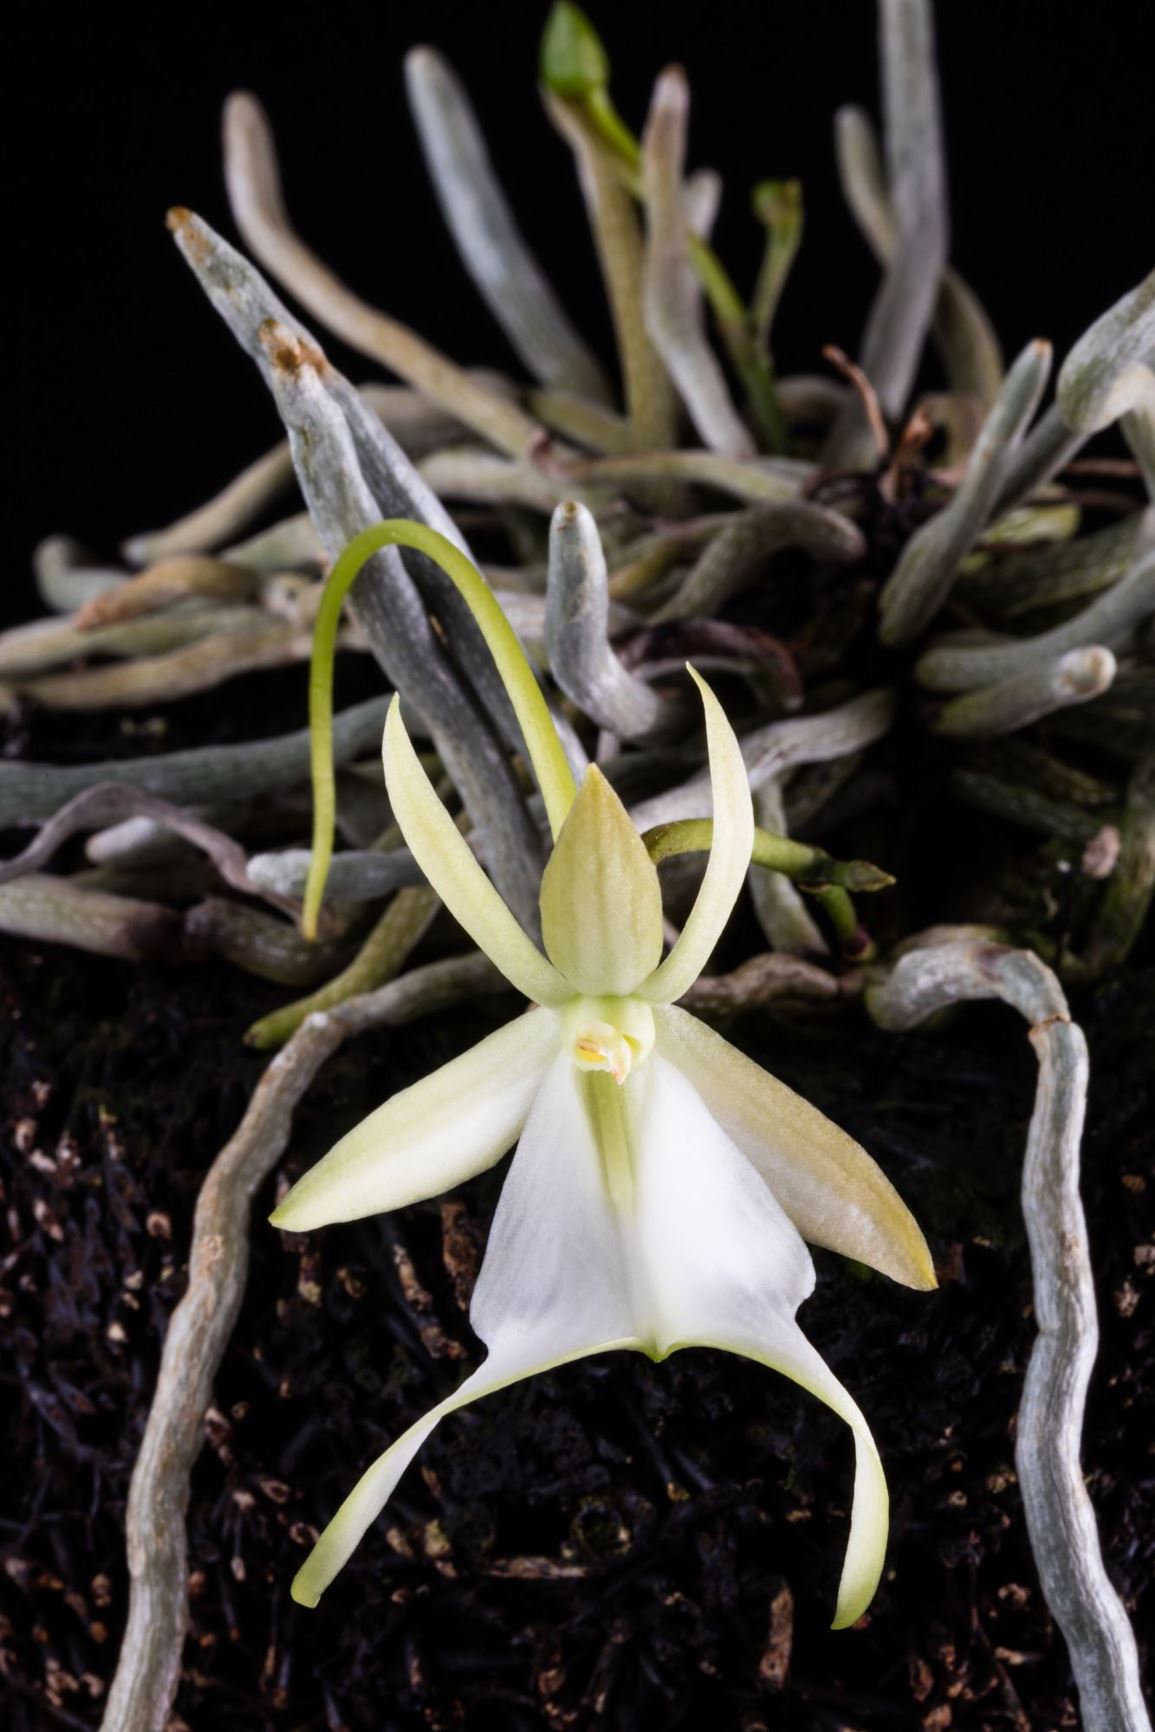 Dendrophylax lindenii - Ghost Orchid, White Butterfly Orchid, White Frog Orchid, Palm Polly